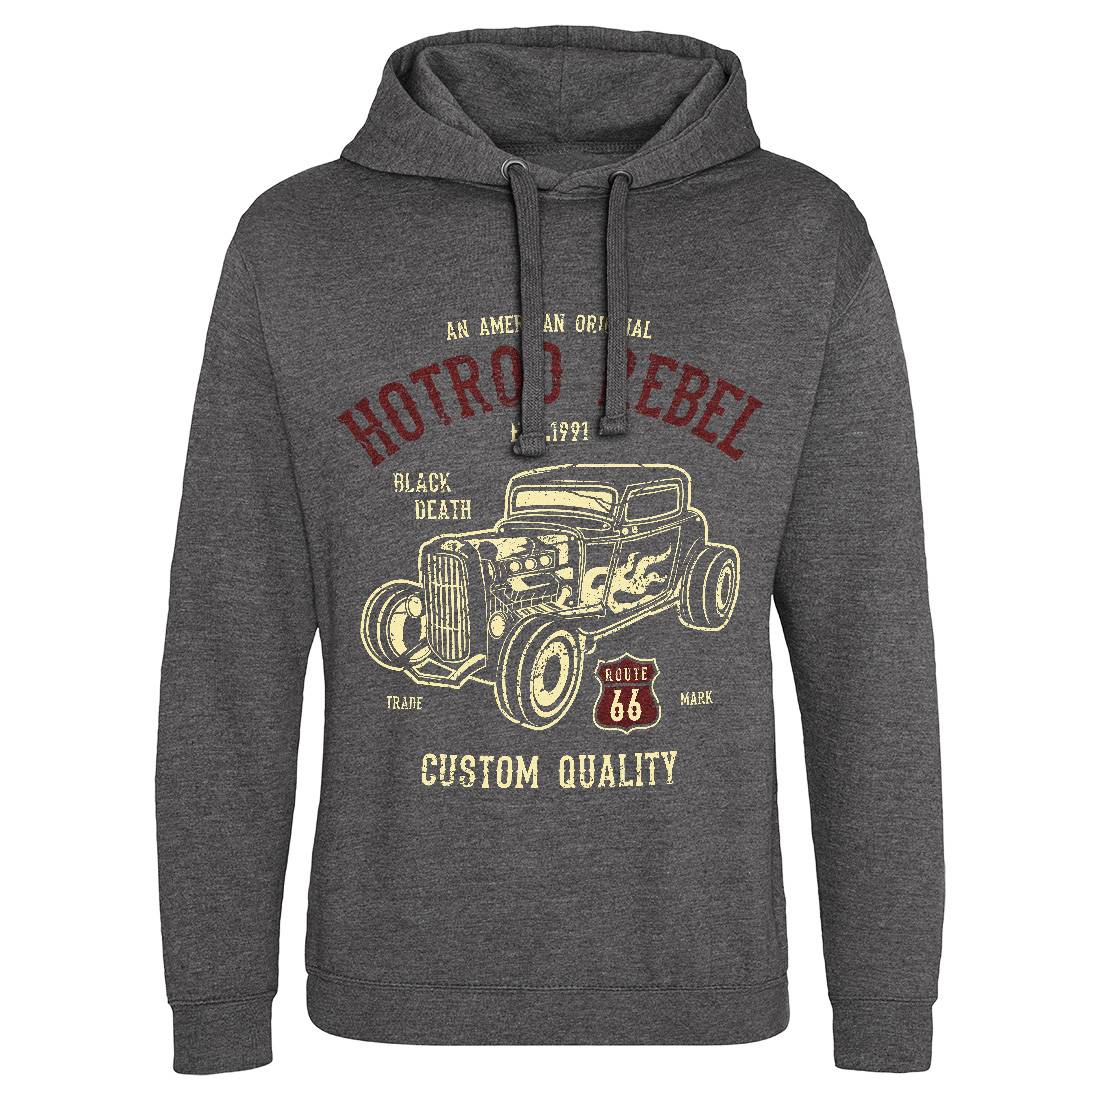 Hot Rod Rebel Mens Hoodie Without Pocket Cars A067